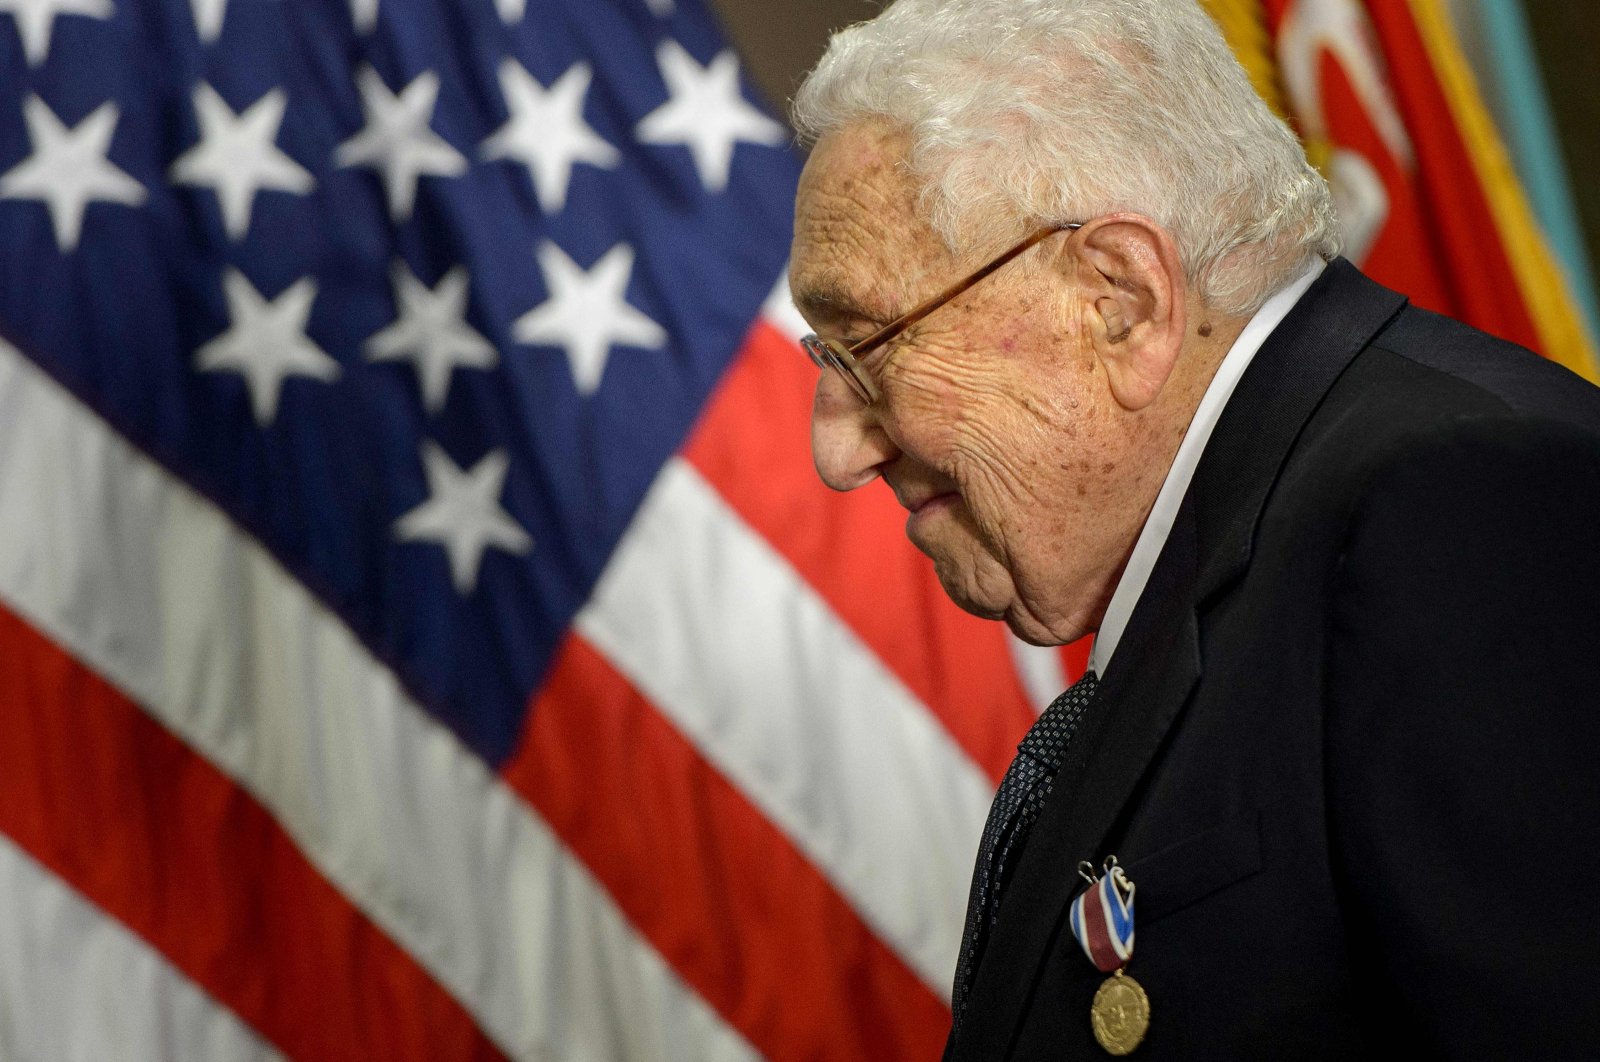 Former U.S. Secretary of State Henry Kissinger smiles after receiving an at the Pentagon honoring his diplomatic career, in Washington, D.C., U.S., May 9, 2016. (AFP Photo)